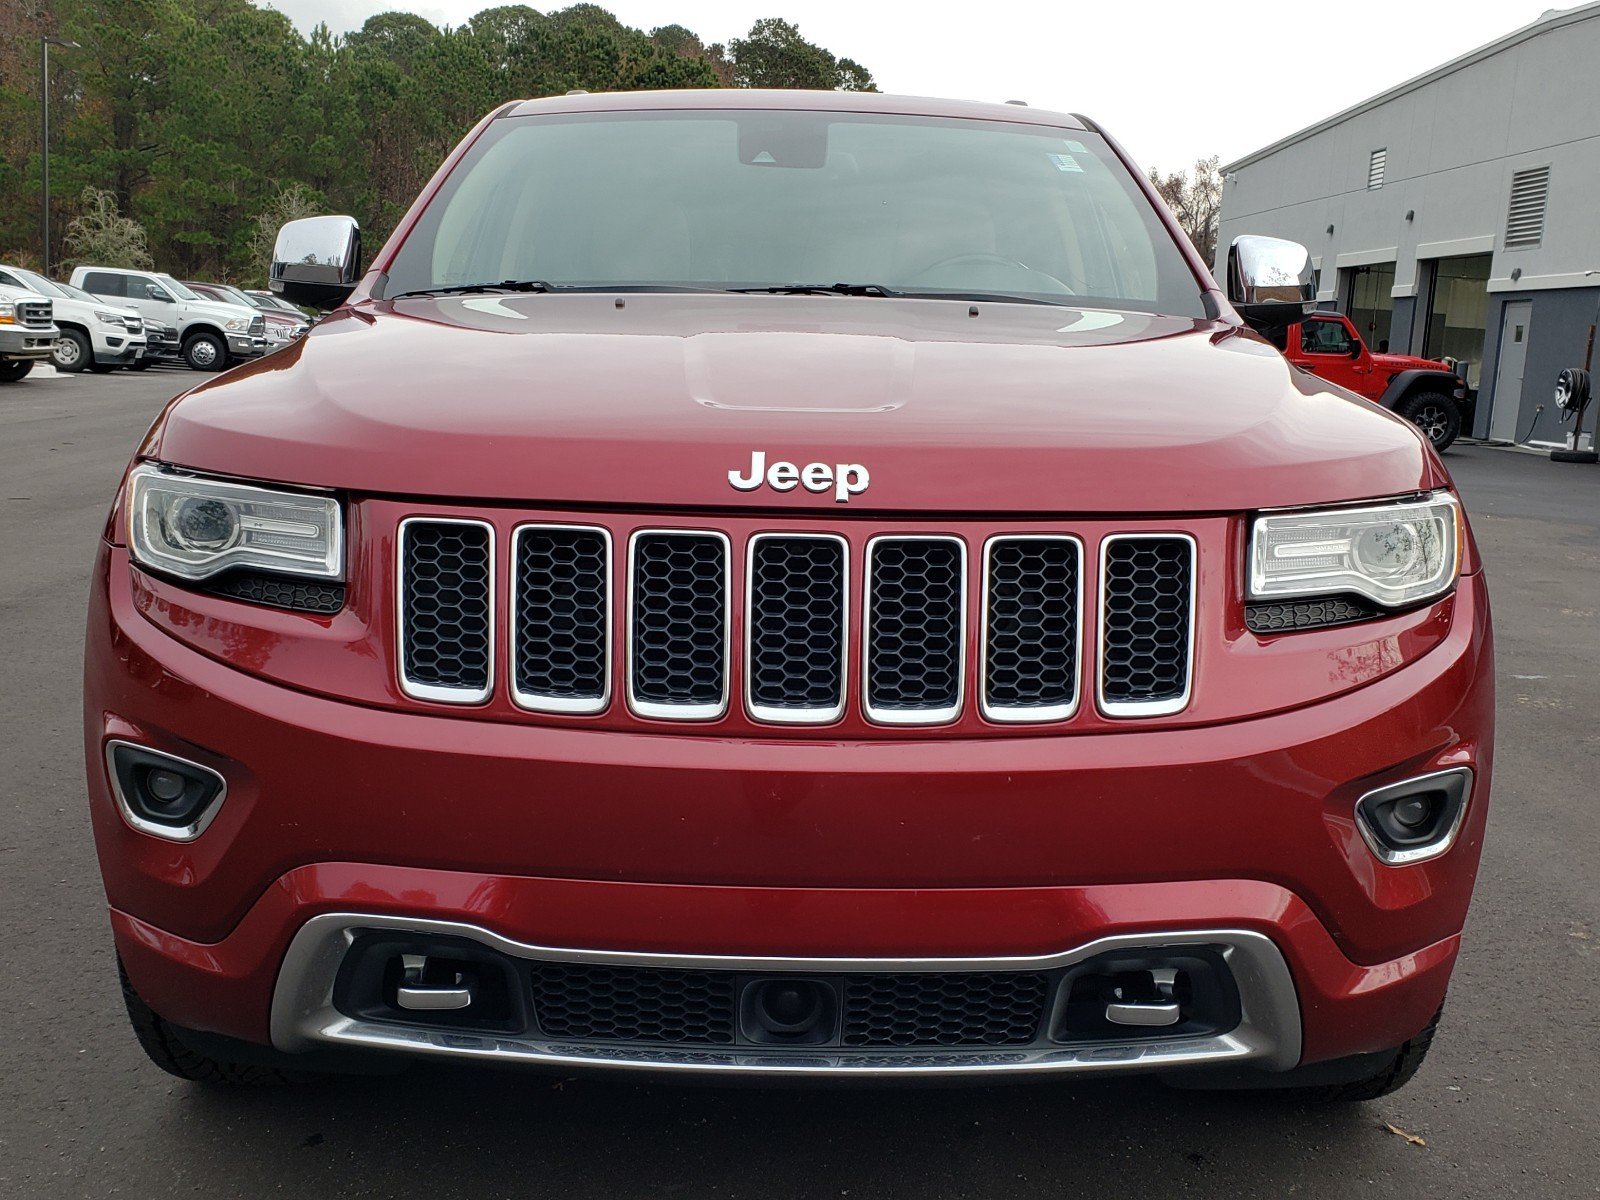 PreOwned 2015 Jeep Grand Cherokee Overland 4D Sport Utility in